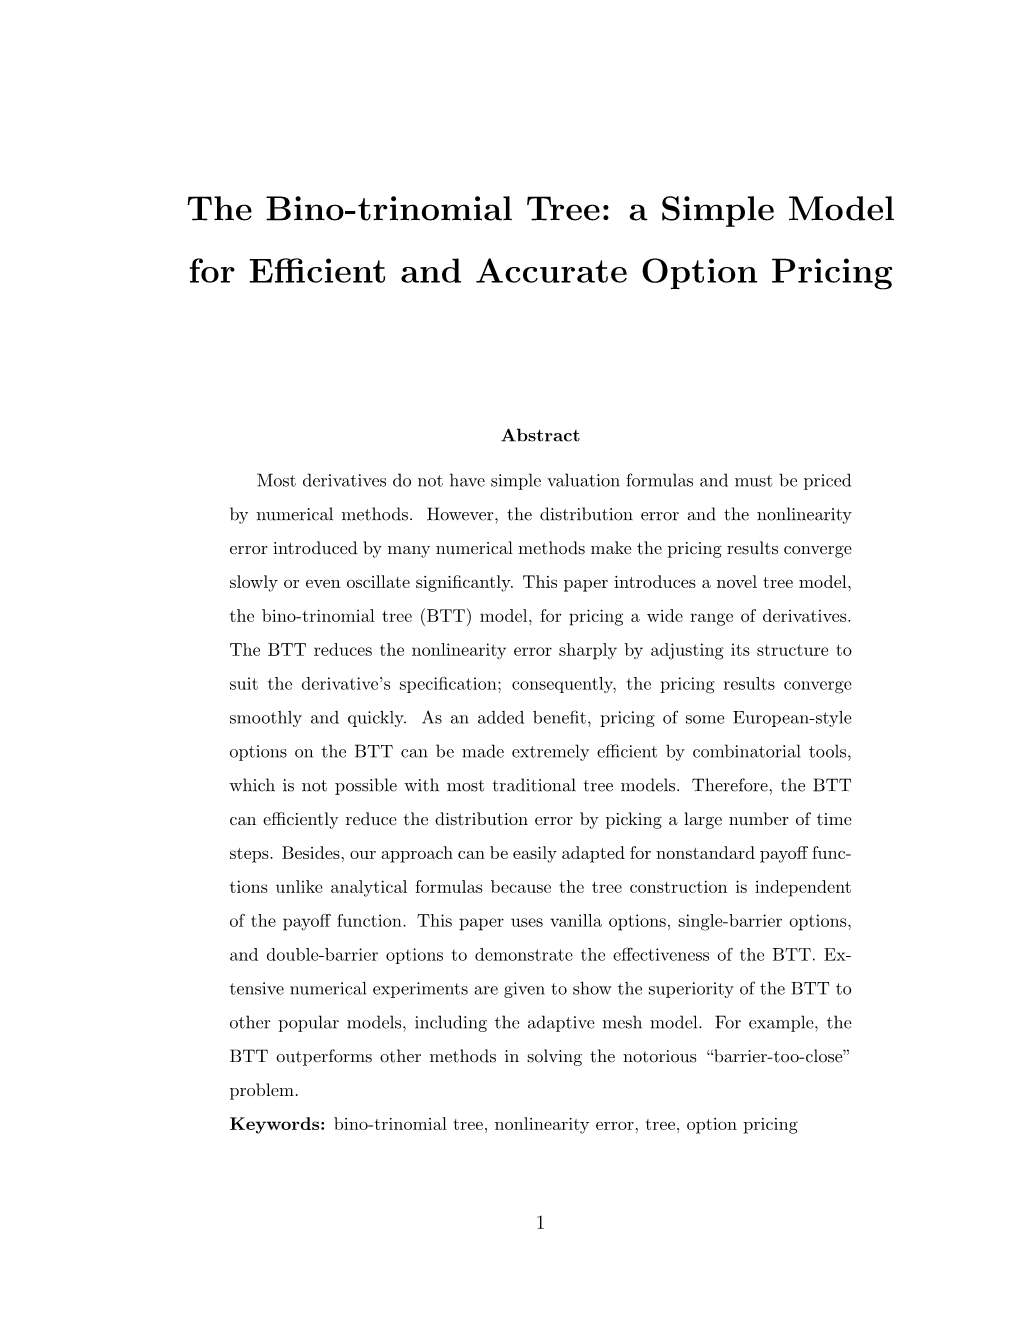 The Bino-Trinomial Tree: a Simple Model for Efficient and Accurate Option Pricing